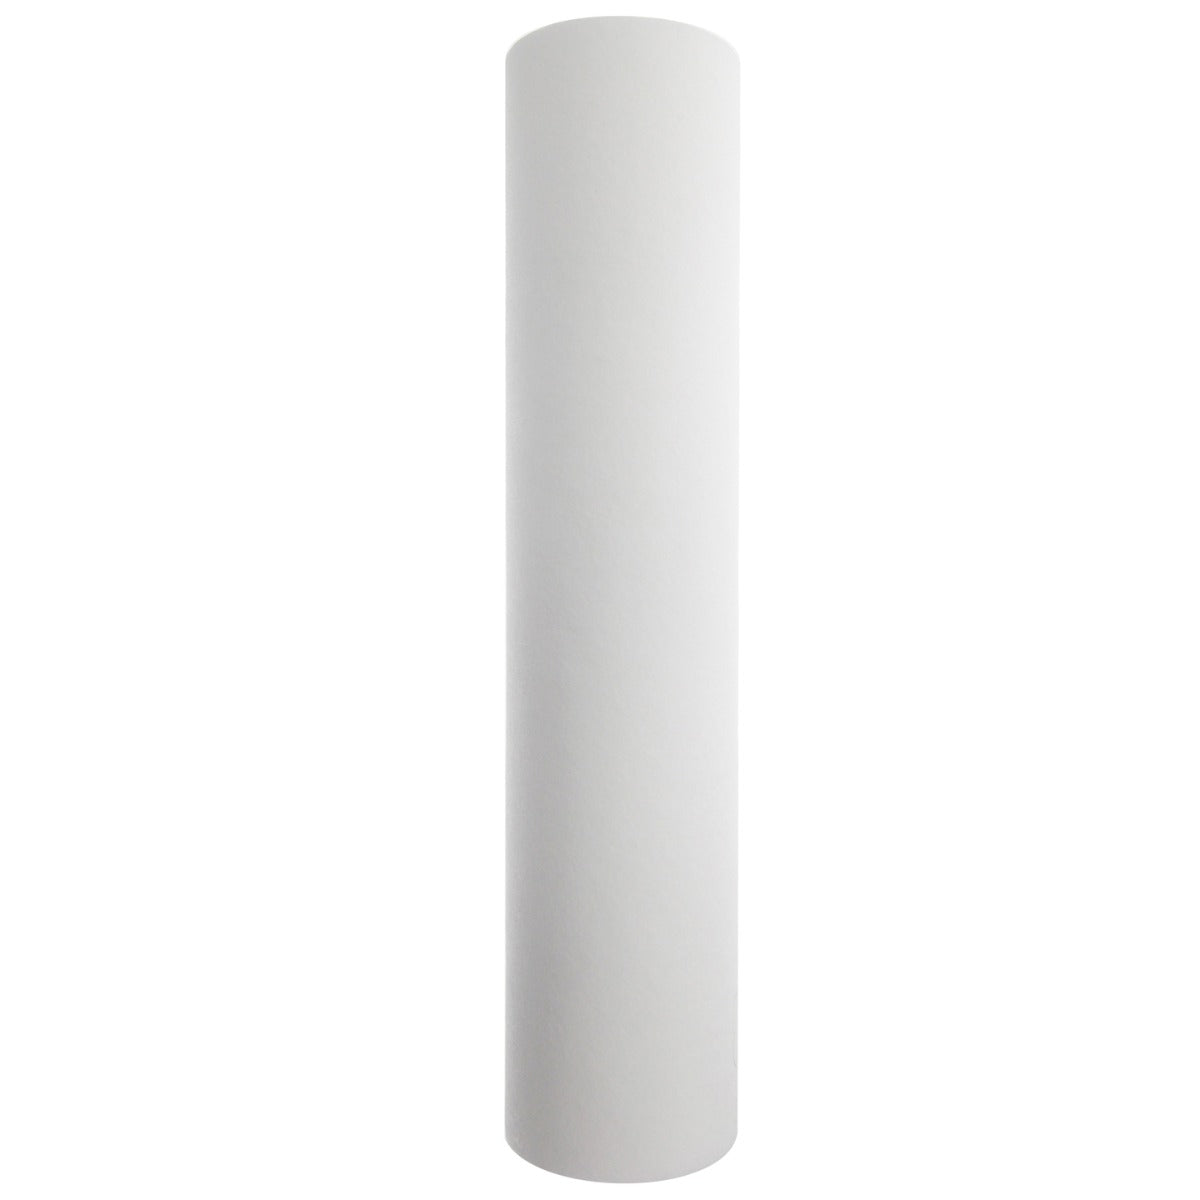 Tier1 20 inch x 4.5 inch Sediment Water Filter (10 Micron)